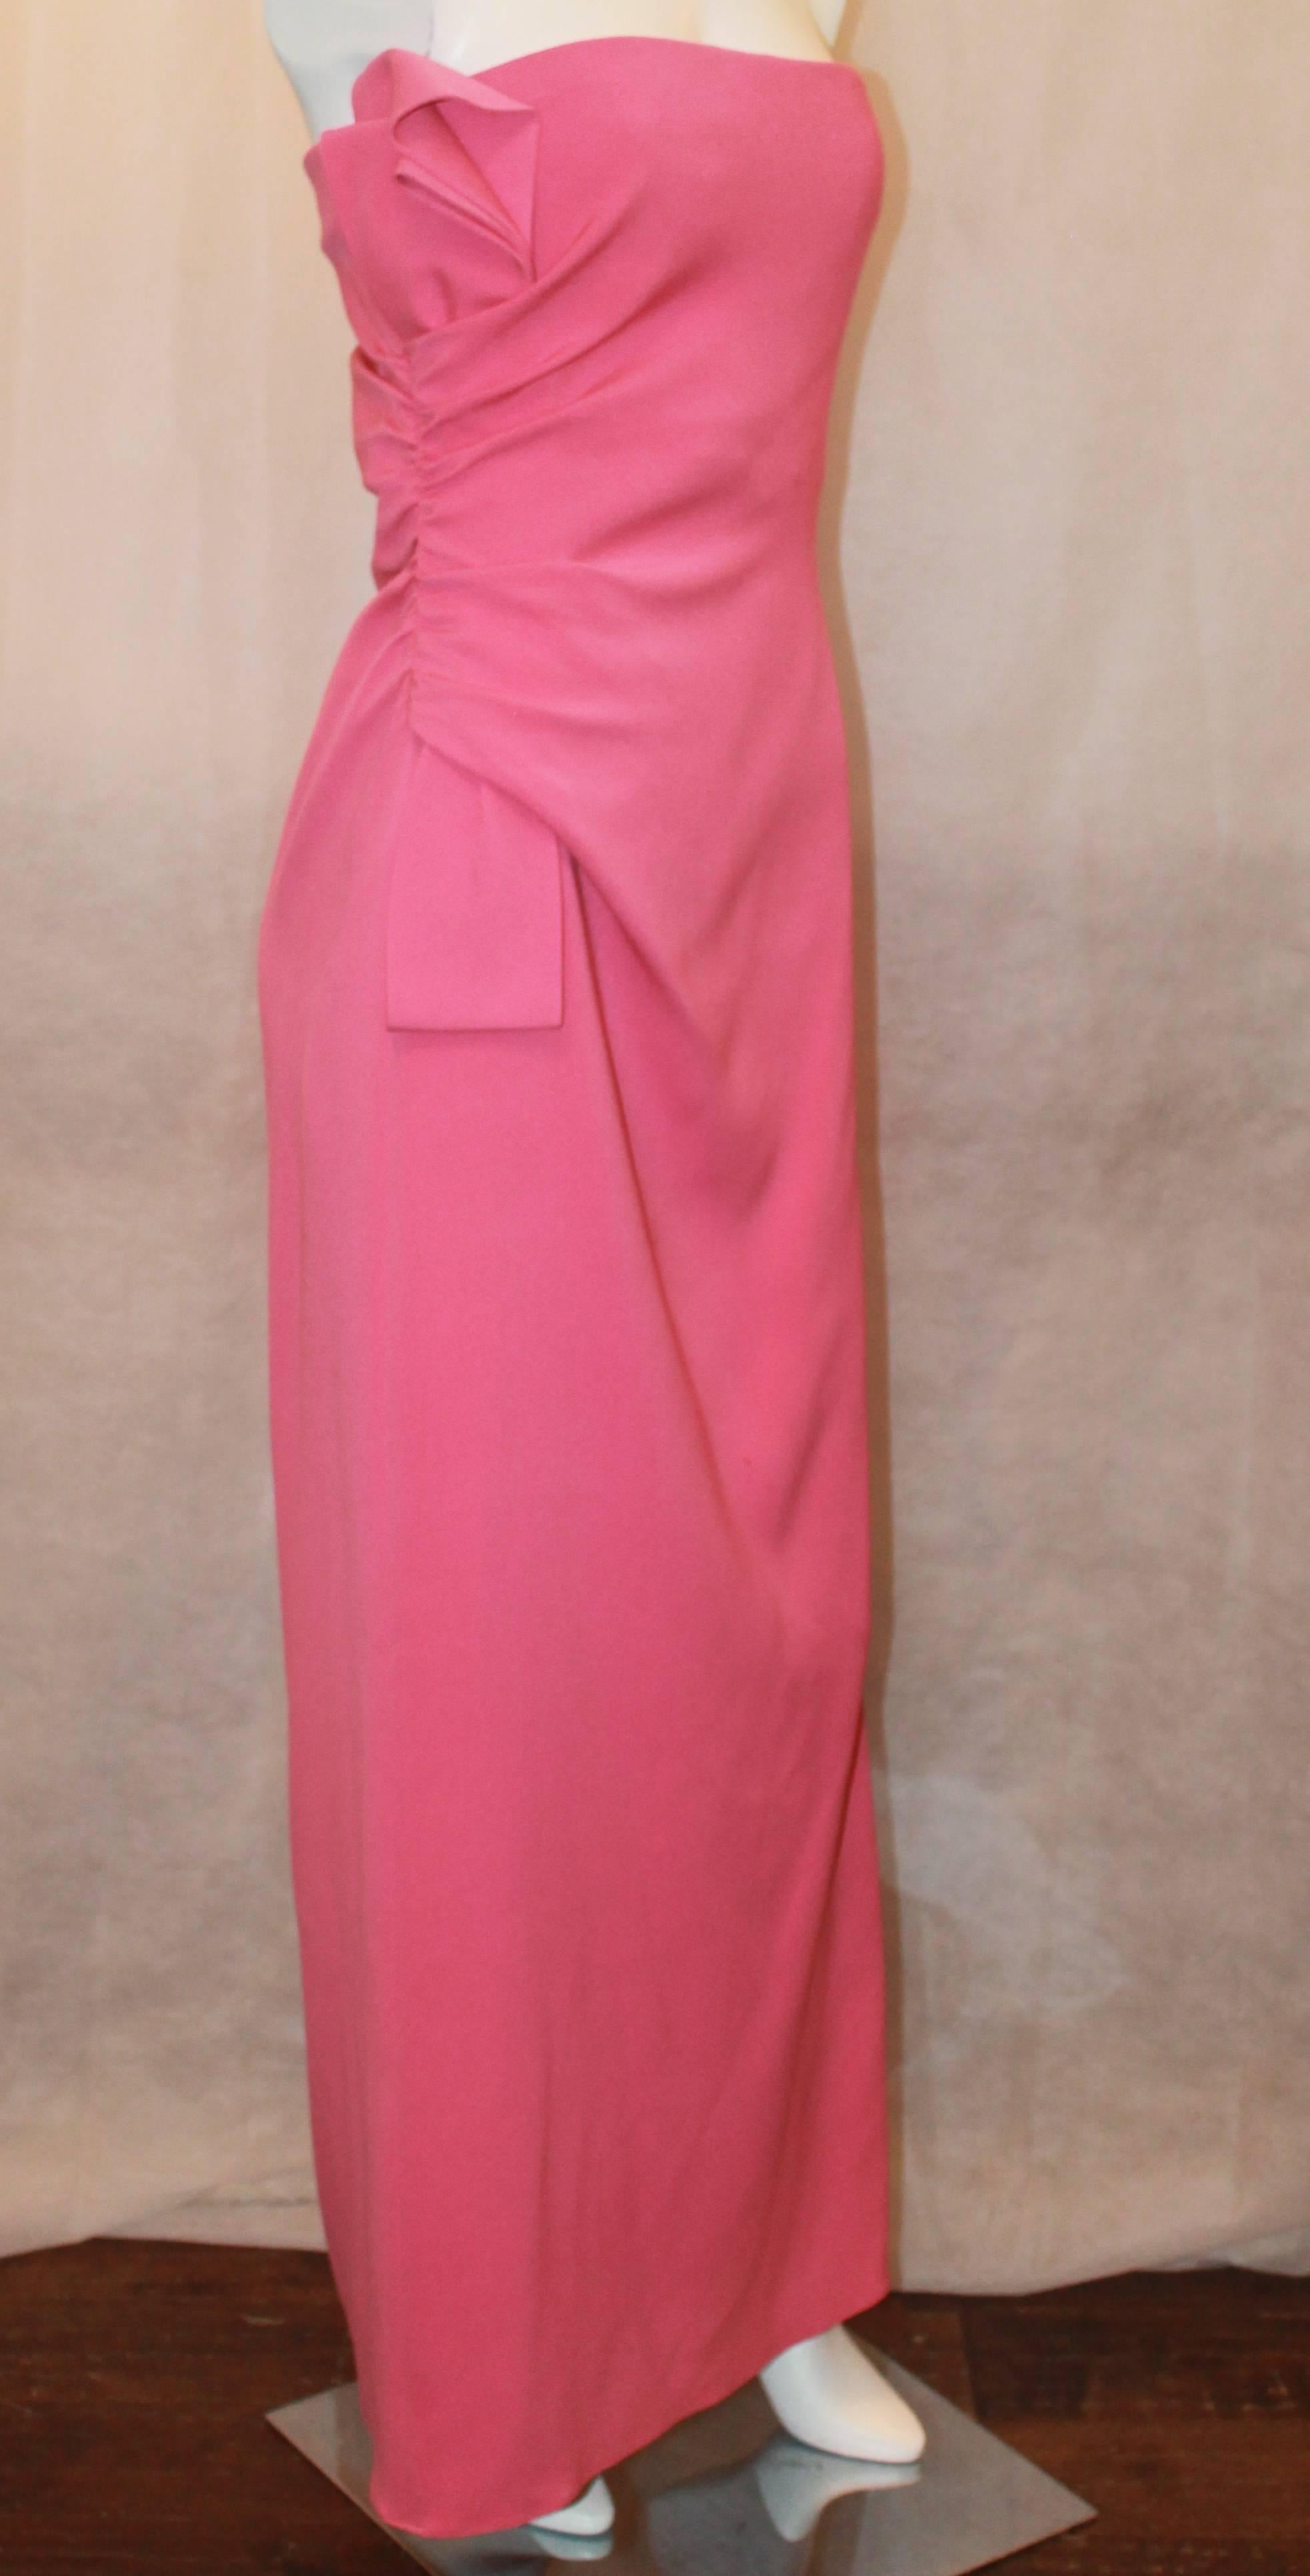 Valentino Pink Silk Strapless Gown w/ Side Ruching - L.  This lovely gown is in very good condition with minor general wear throughout.  It features a side ruching with a bow design and a side zipper.

Measurements: 34